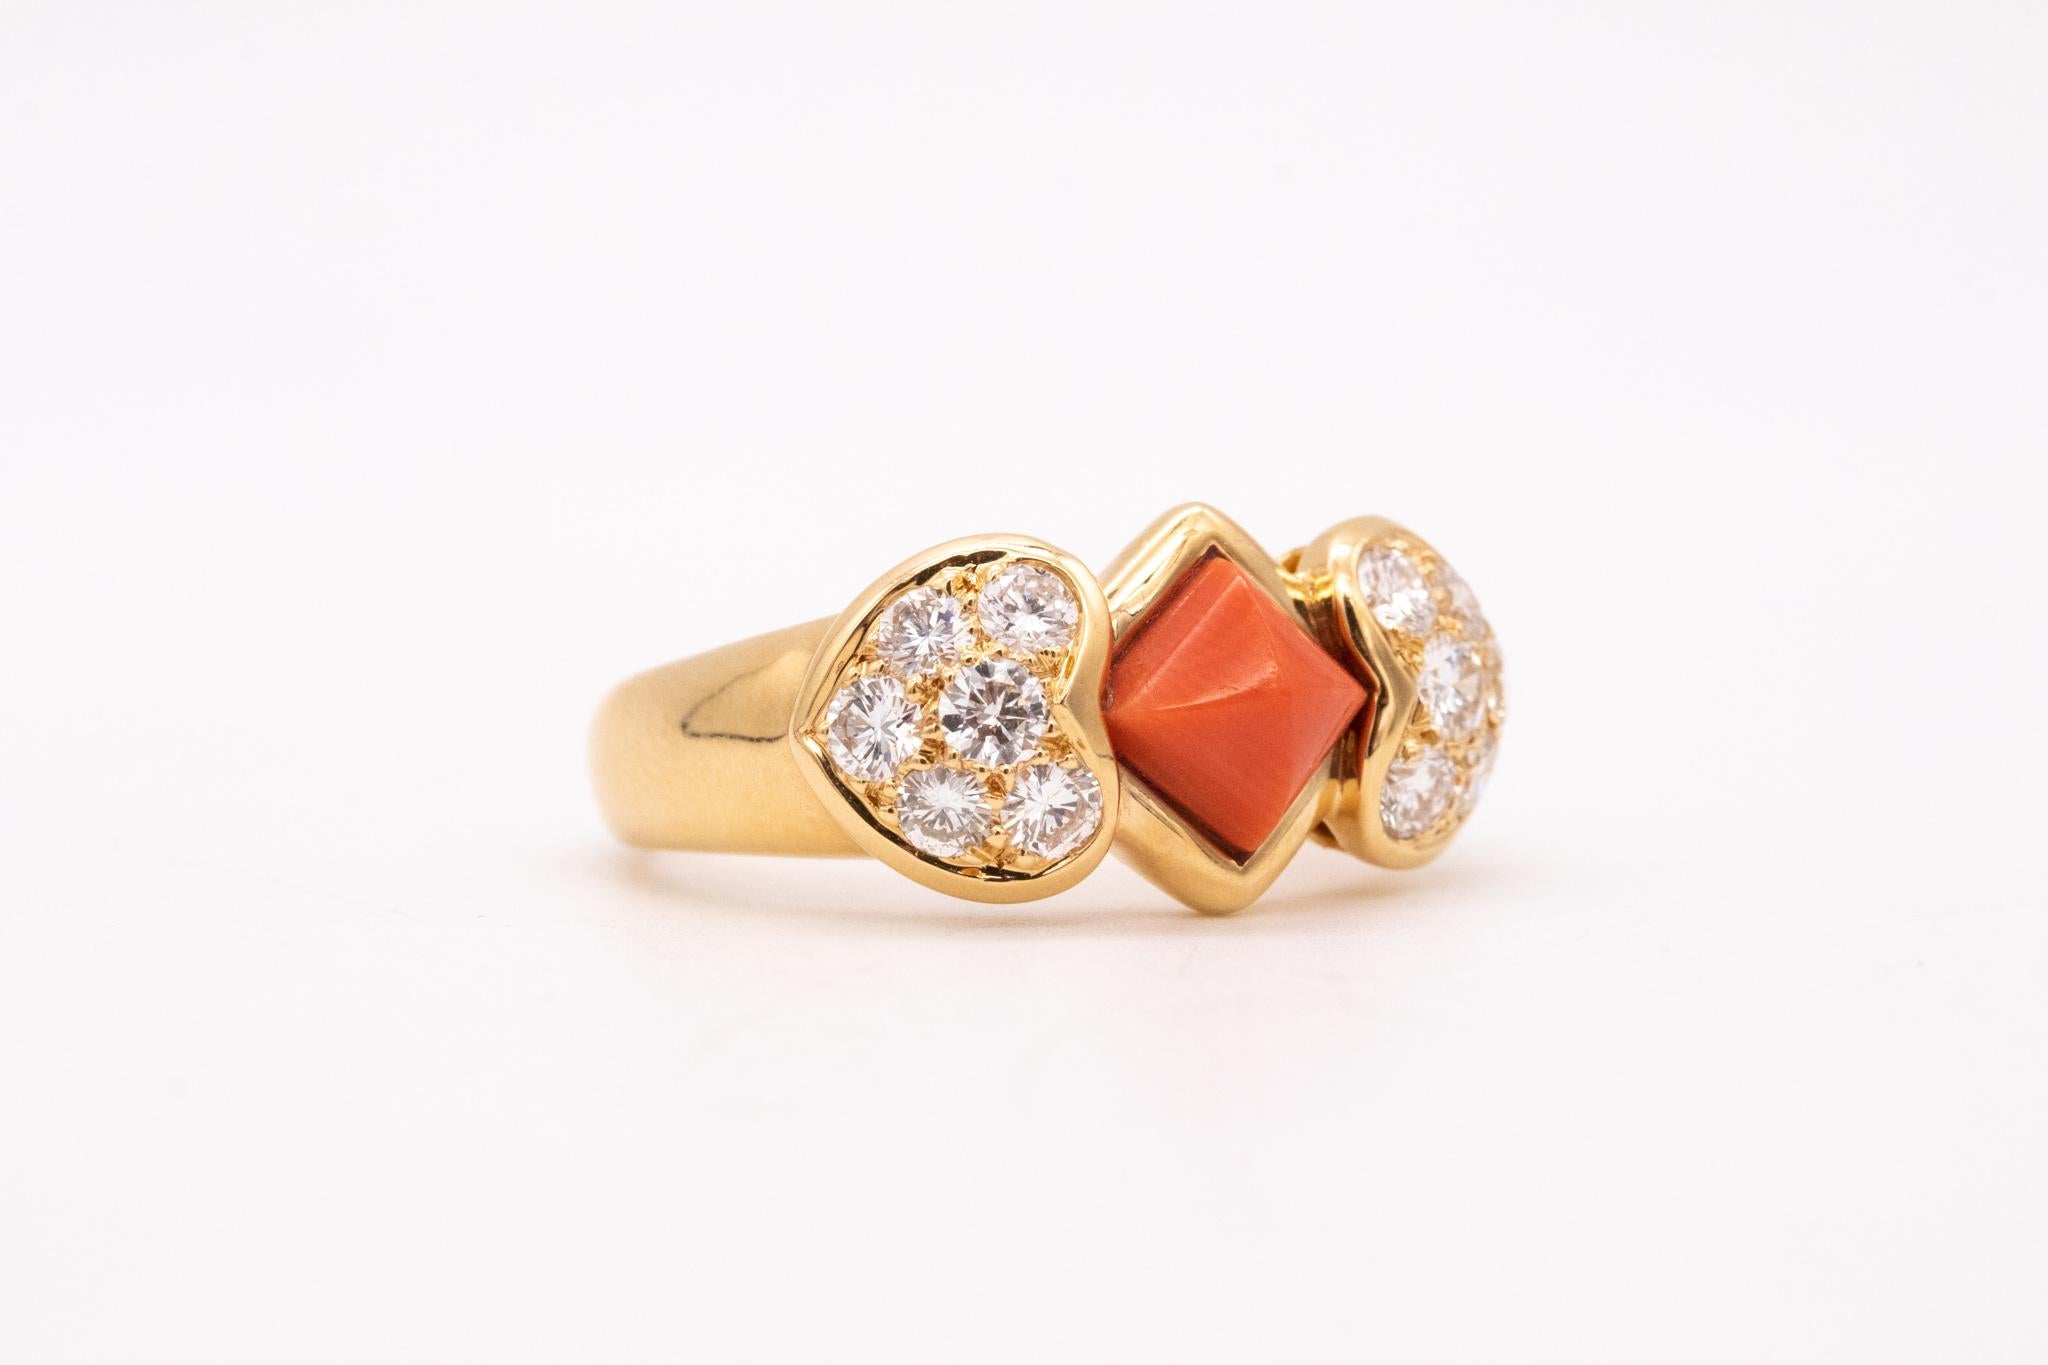 Christian Dior 1970 Paris Ring 18 Karats Gold with 1.96 Ctw Diamonds and Coral For Sale 2